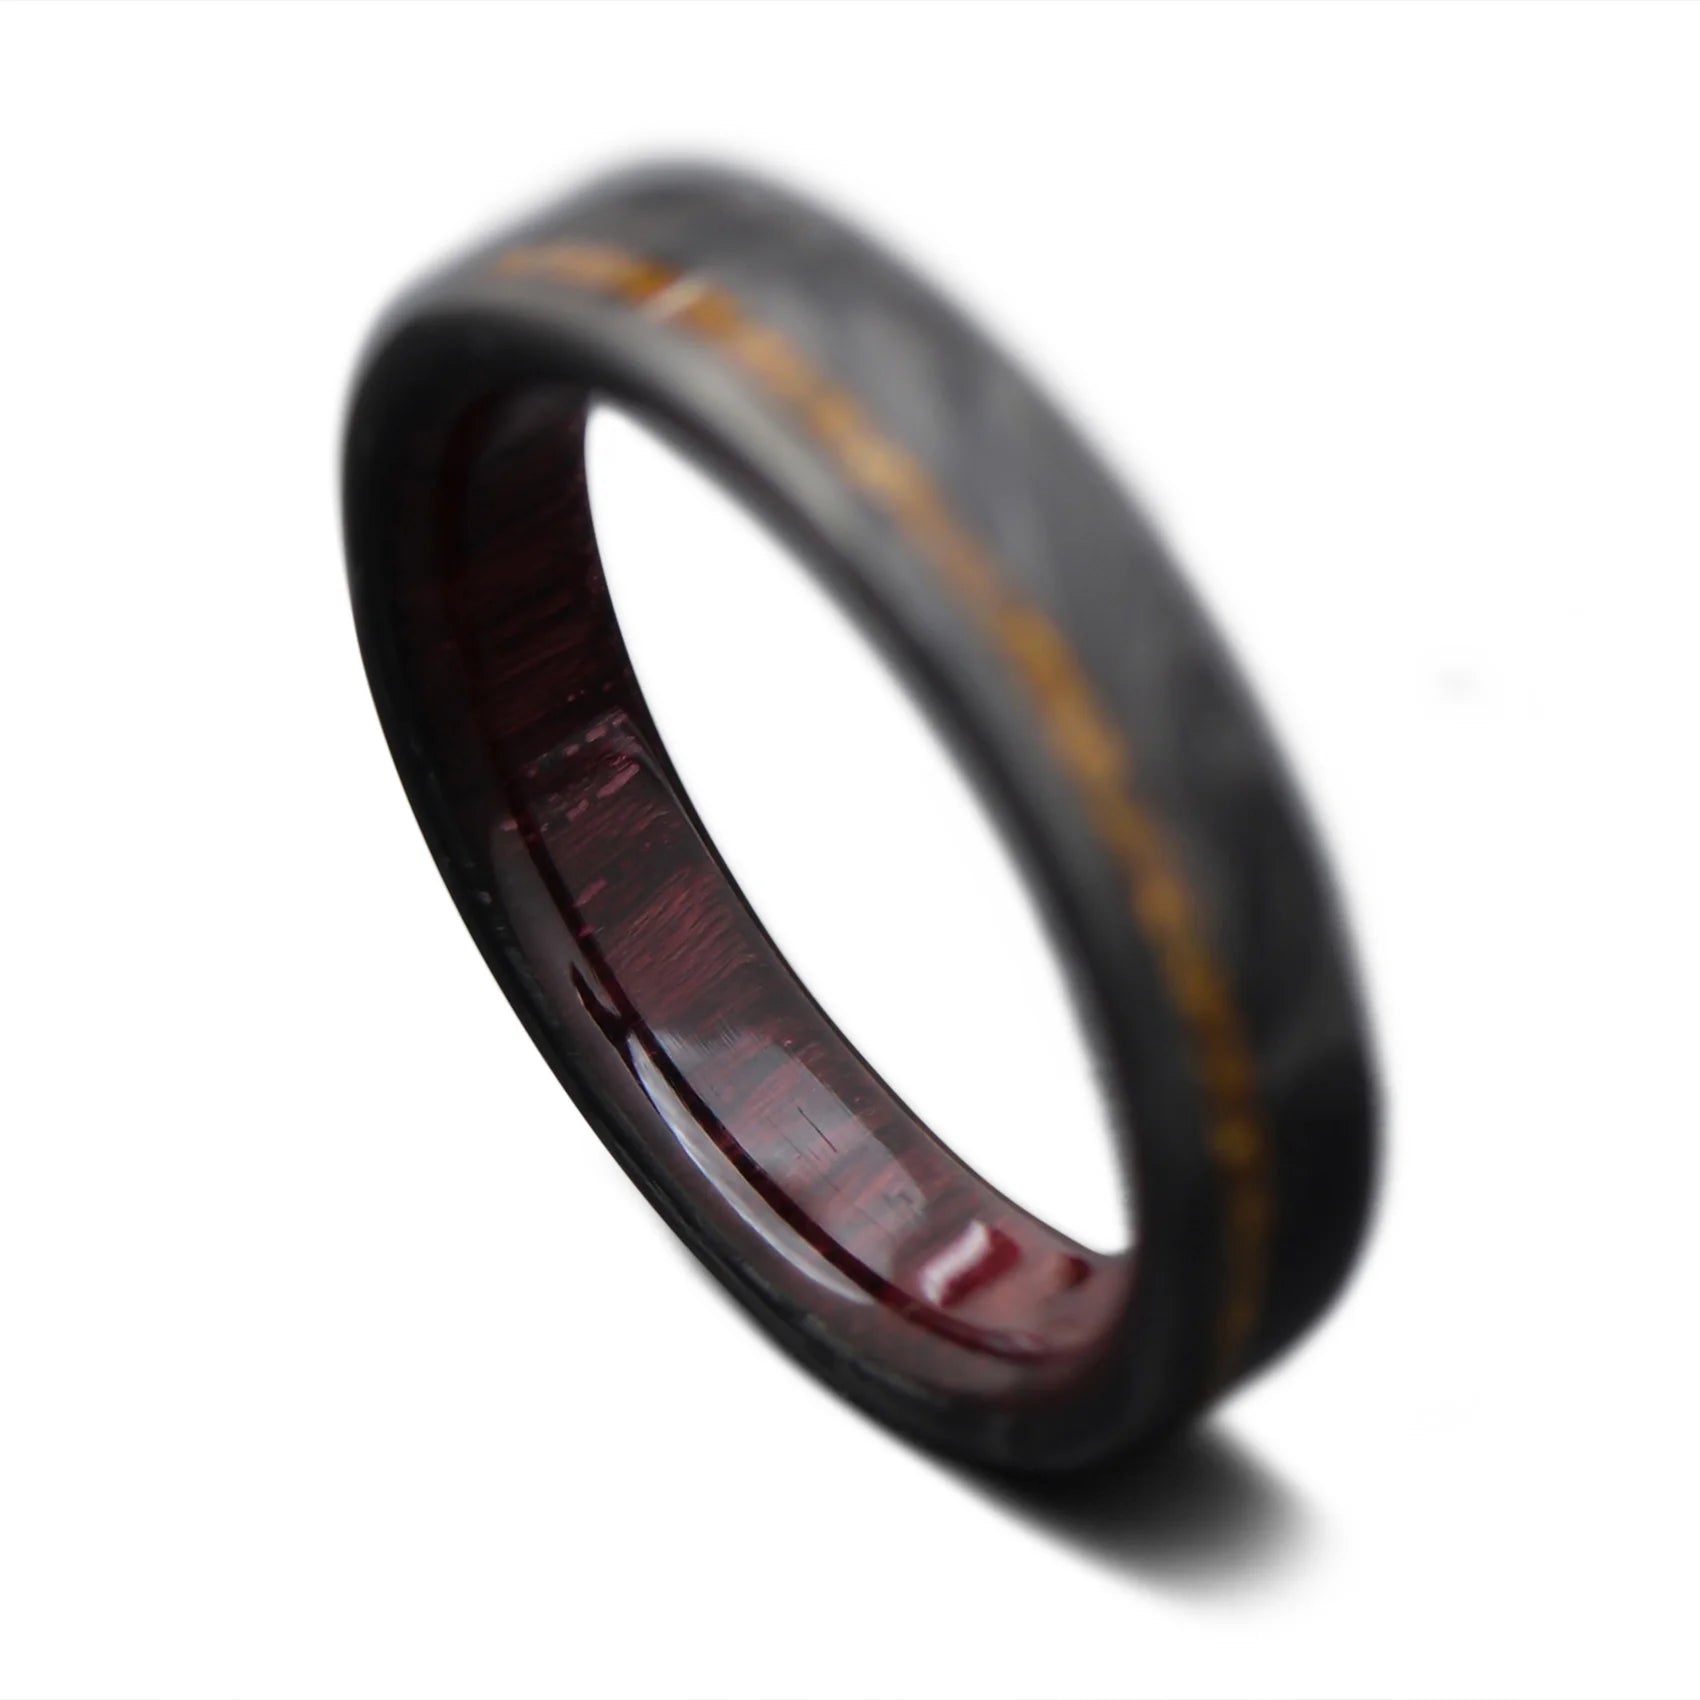 Forged carbon fiber ring with tiger eye and koa wood inner sleeve